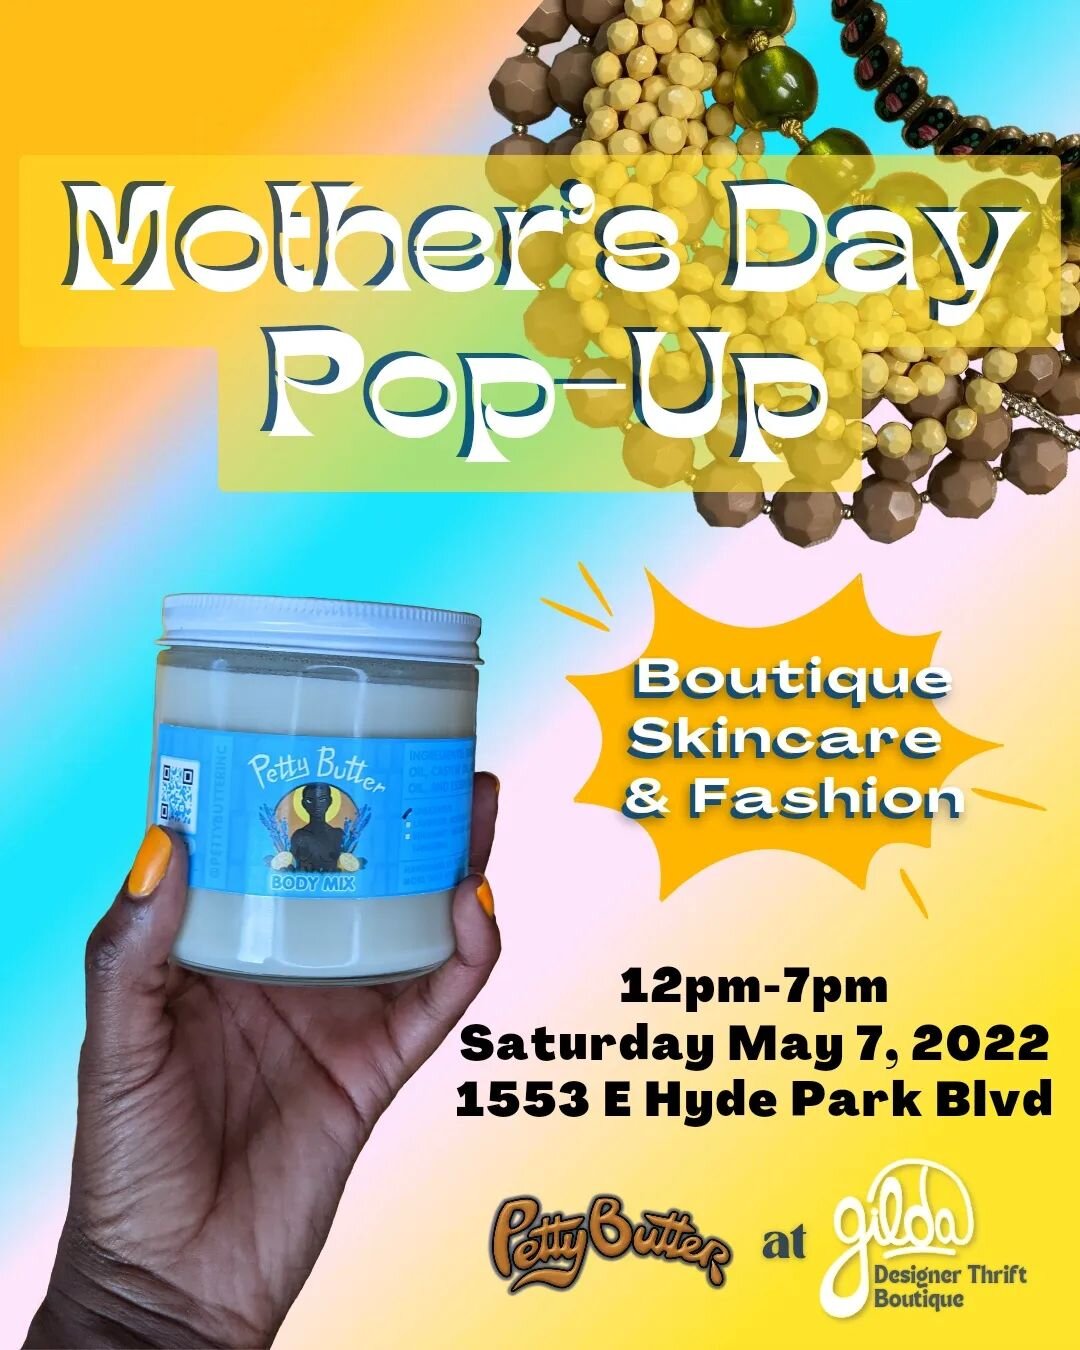 Announcing the Petty Butter Mother's Day Pop-Up at @gilda.designerthriftboutique

Saturday May 7, 2022 *MASKS REQUIRED*

Grab a comforting jar of Petty Butter for your mother, lover, or yourself without having to pay for shipping. All scents and size